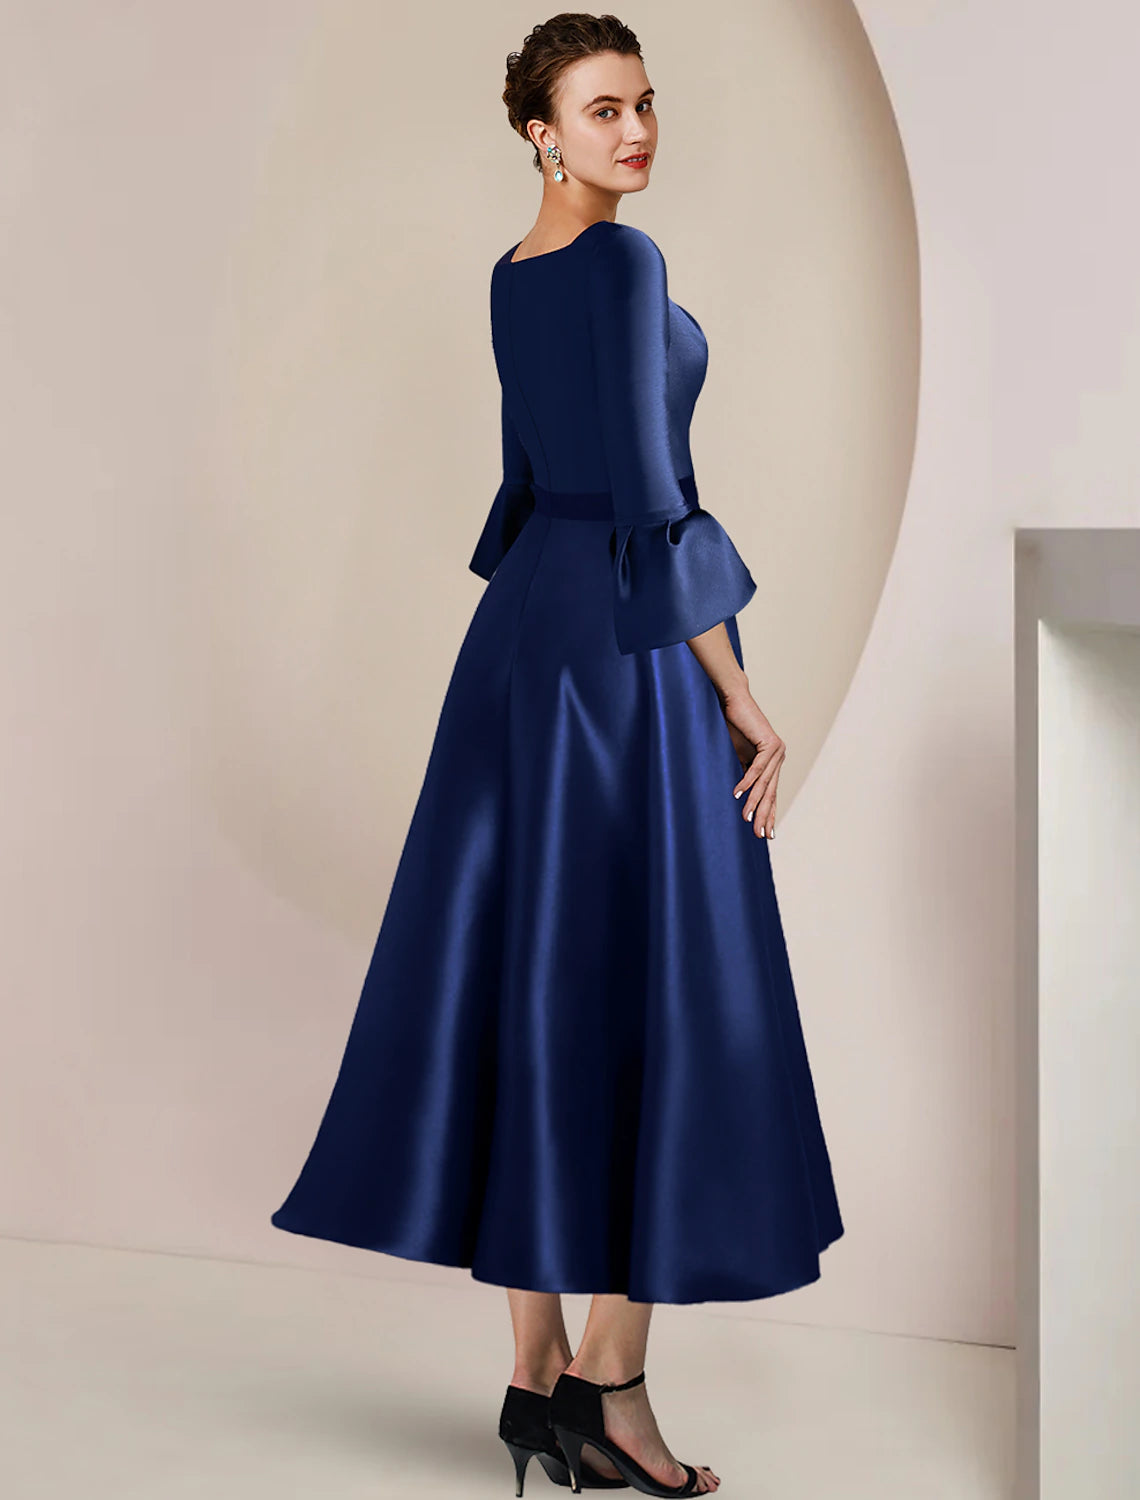 A-Line Mother of the Bride Dress Formal Wedding Guest Party Elegant Bateau Neck Tea Length Satin 3/4 Length Sleeve with Bow(s) Split Front